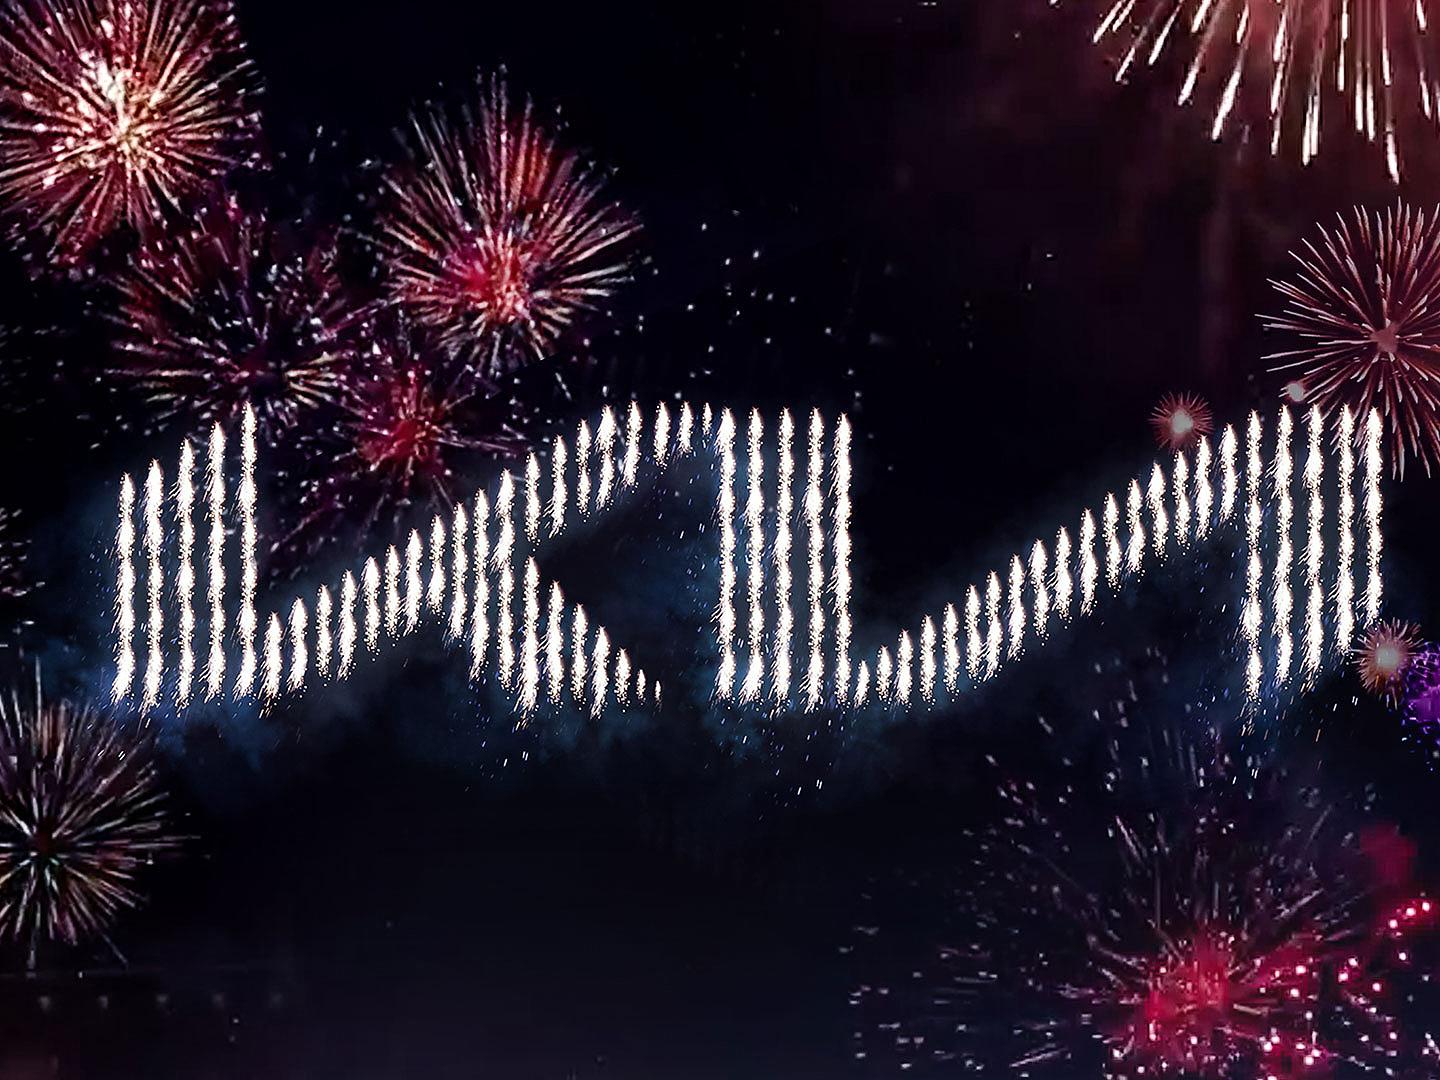 The new Kia logo was seen above the skyline in Korea as part of a pyrotechnics display.